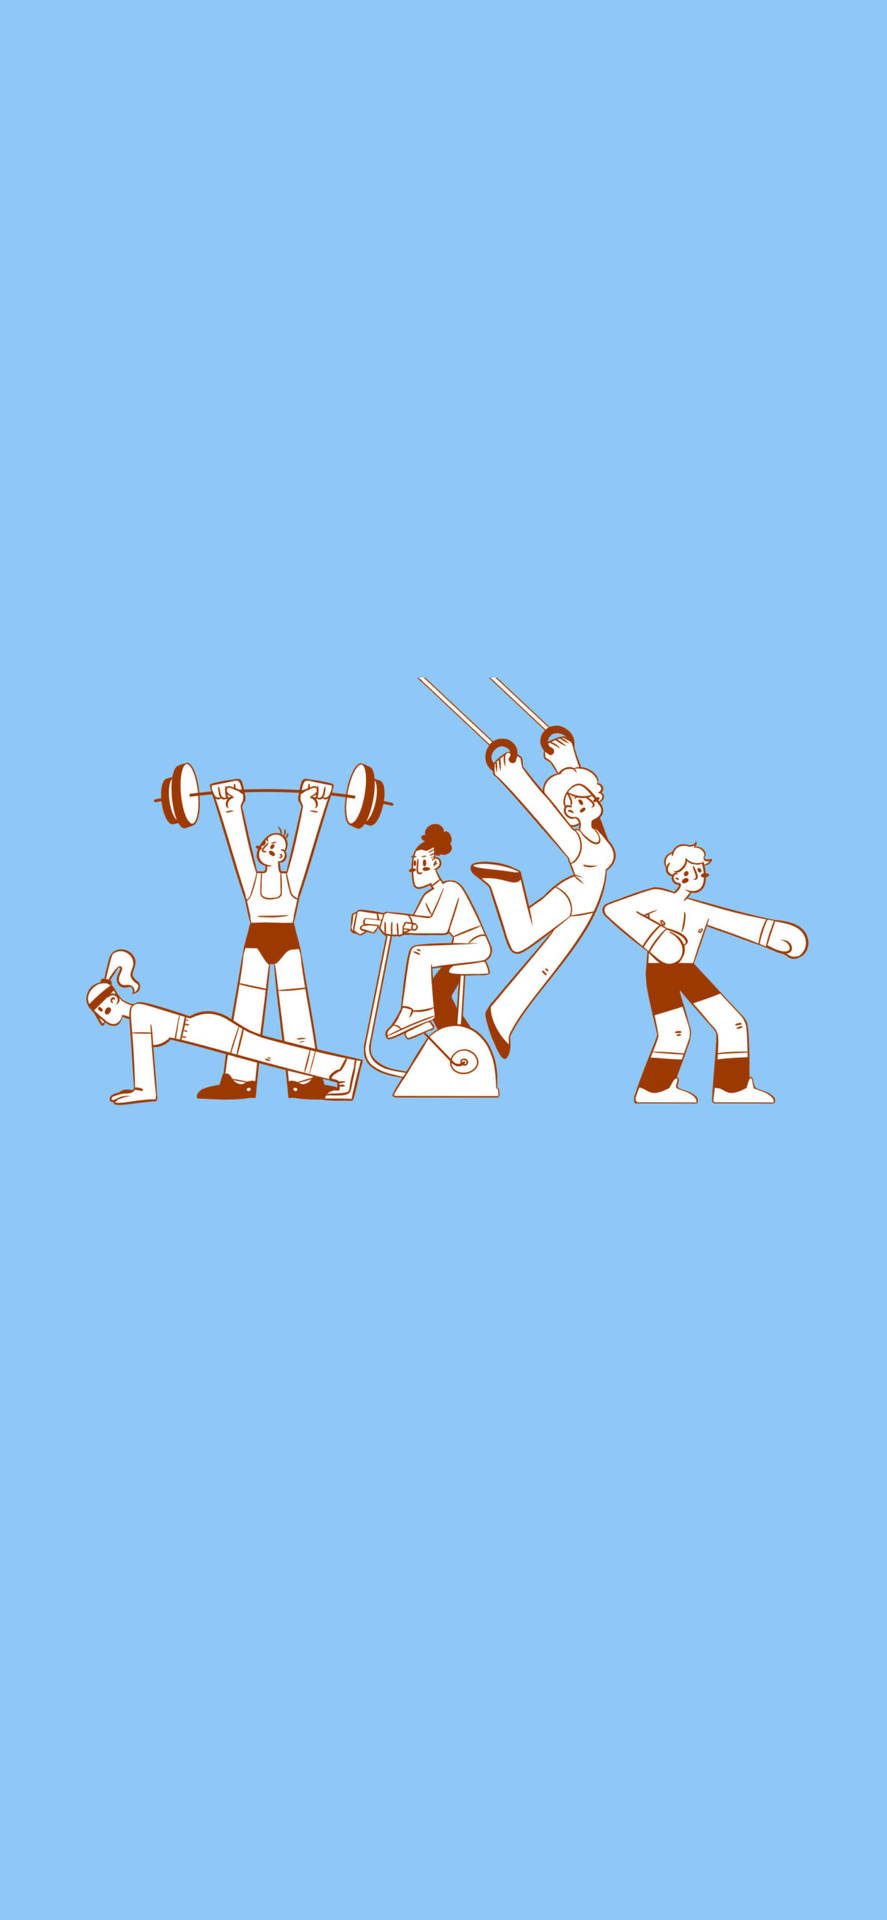 Exercise With Gym Buddies Pastel Blue Wallpaper